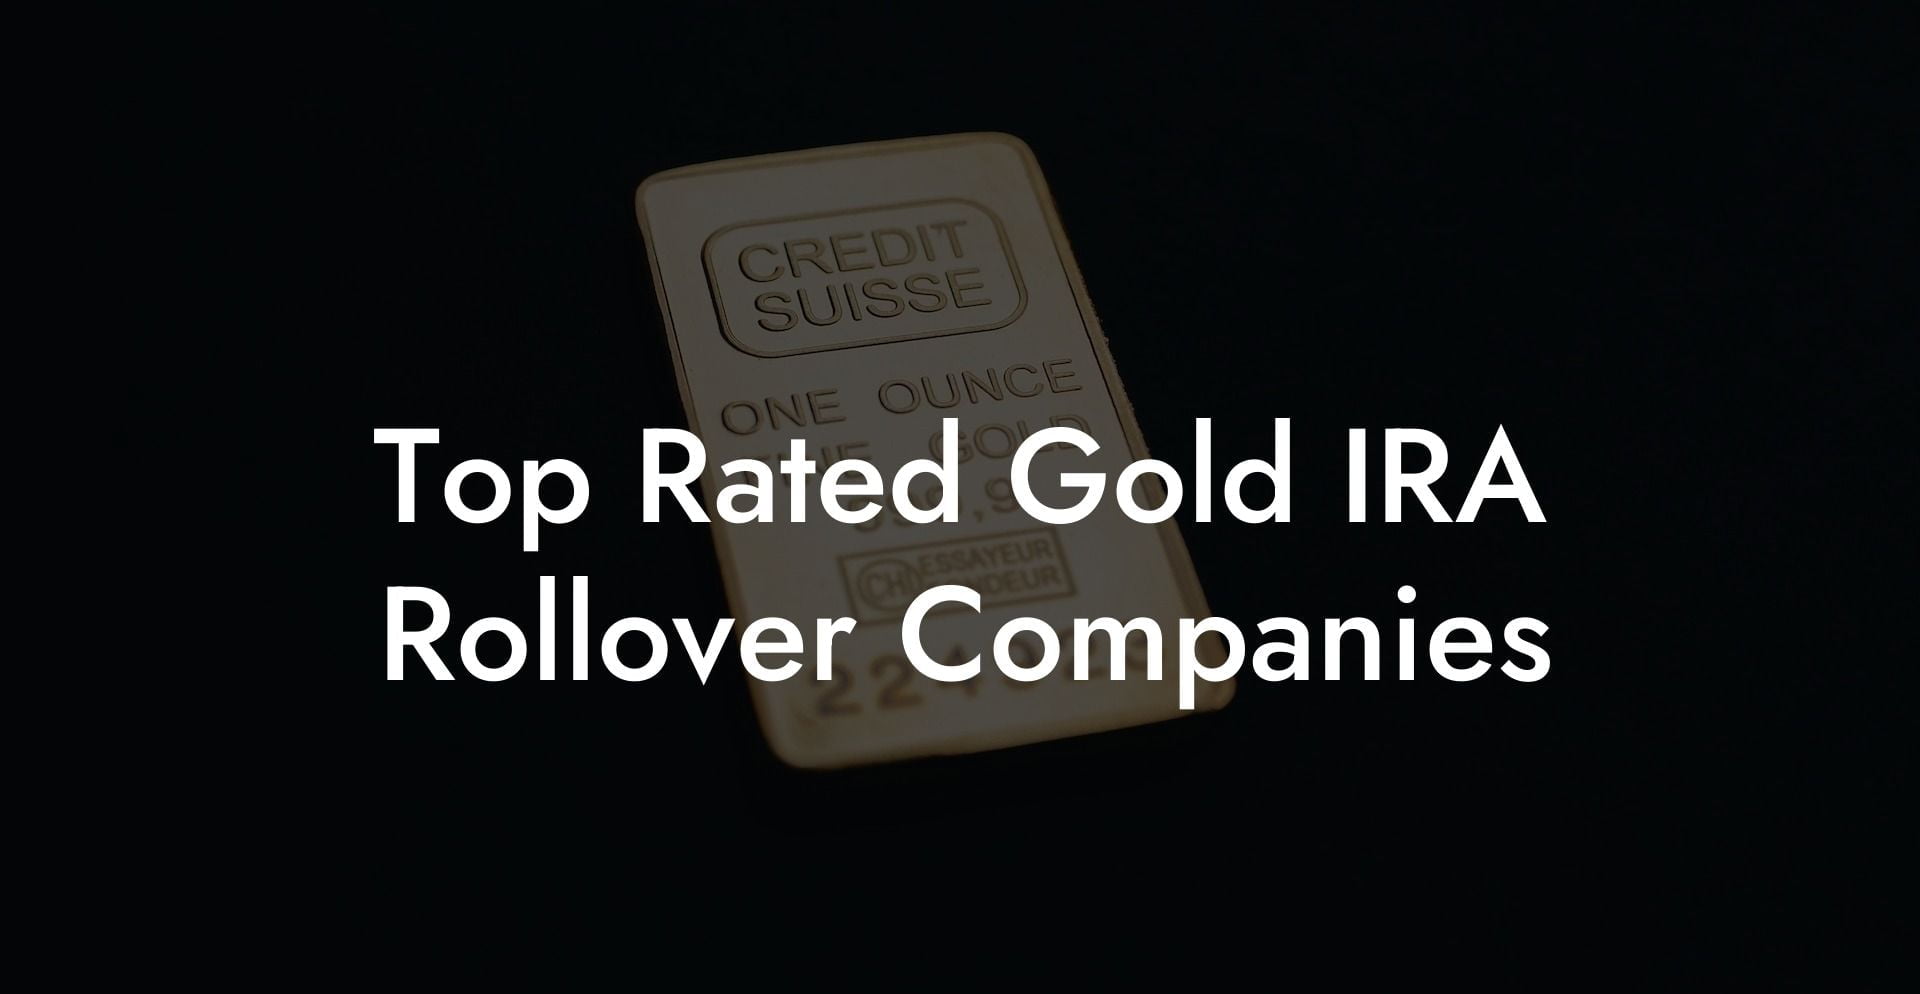 Top Rated Gold IRA Rollover Companies